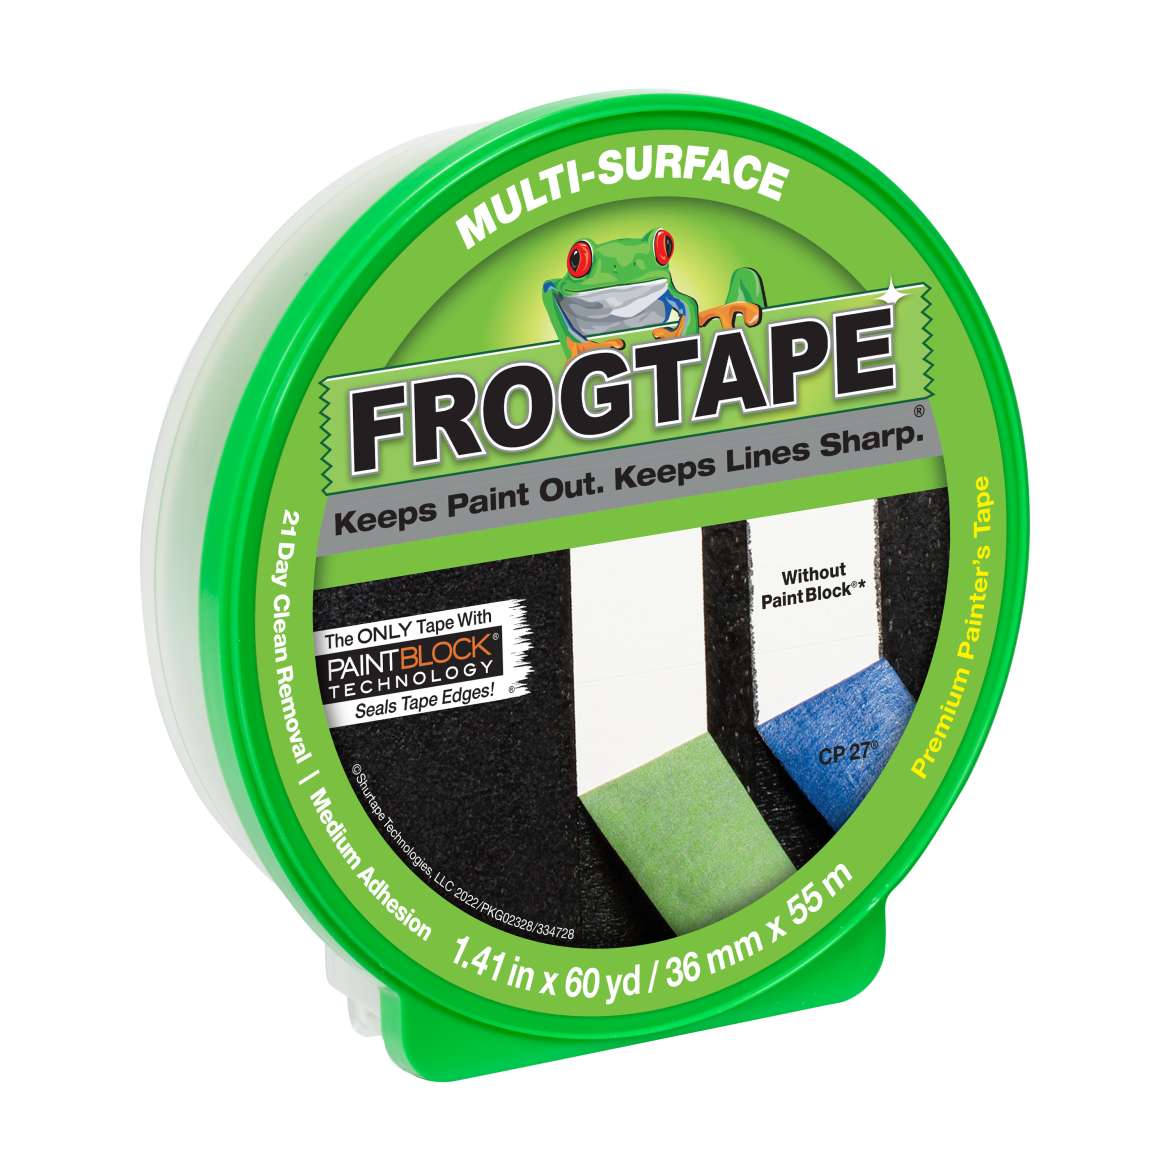 FrogTape® Multi-Surface Painting Tape - Green, 1.41 in. x 60 yd.